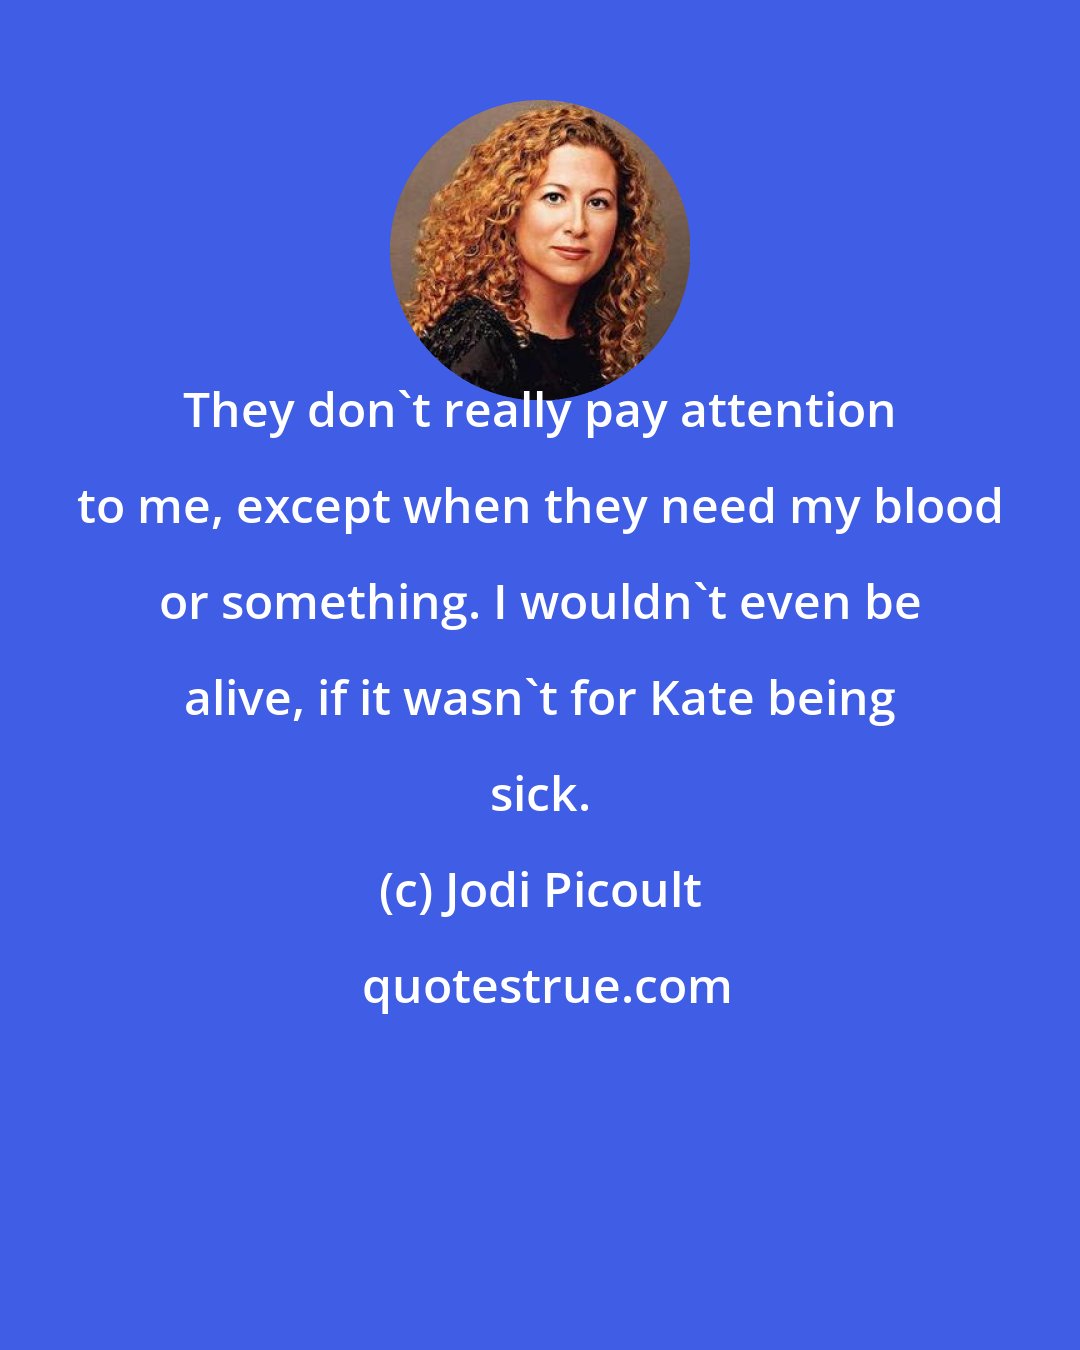 Jodi Picoult: They don't really pay attention to me, except when they need my blood or something. I wouldn't even be alive, if it wasn't for Kate being sick.